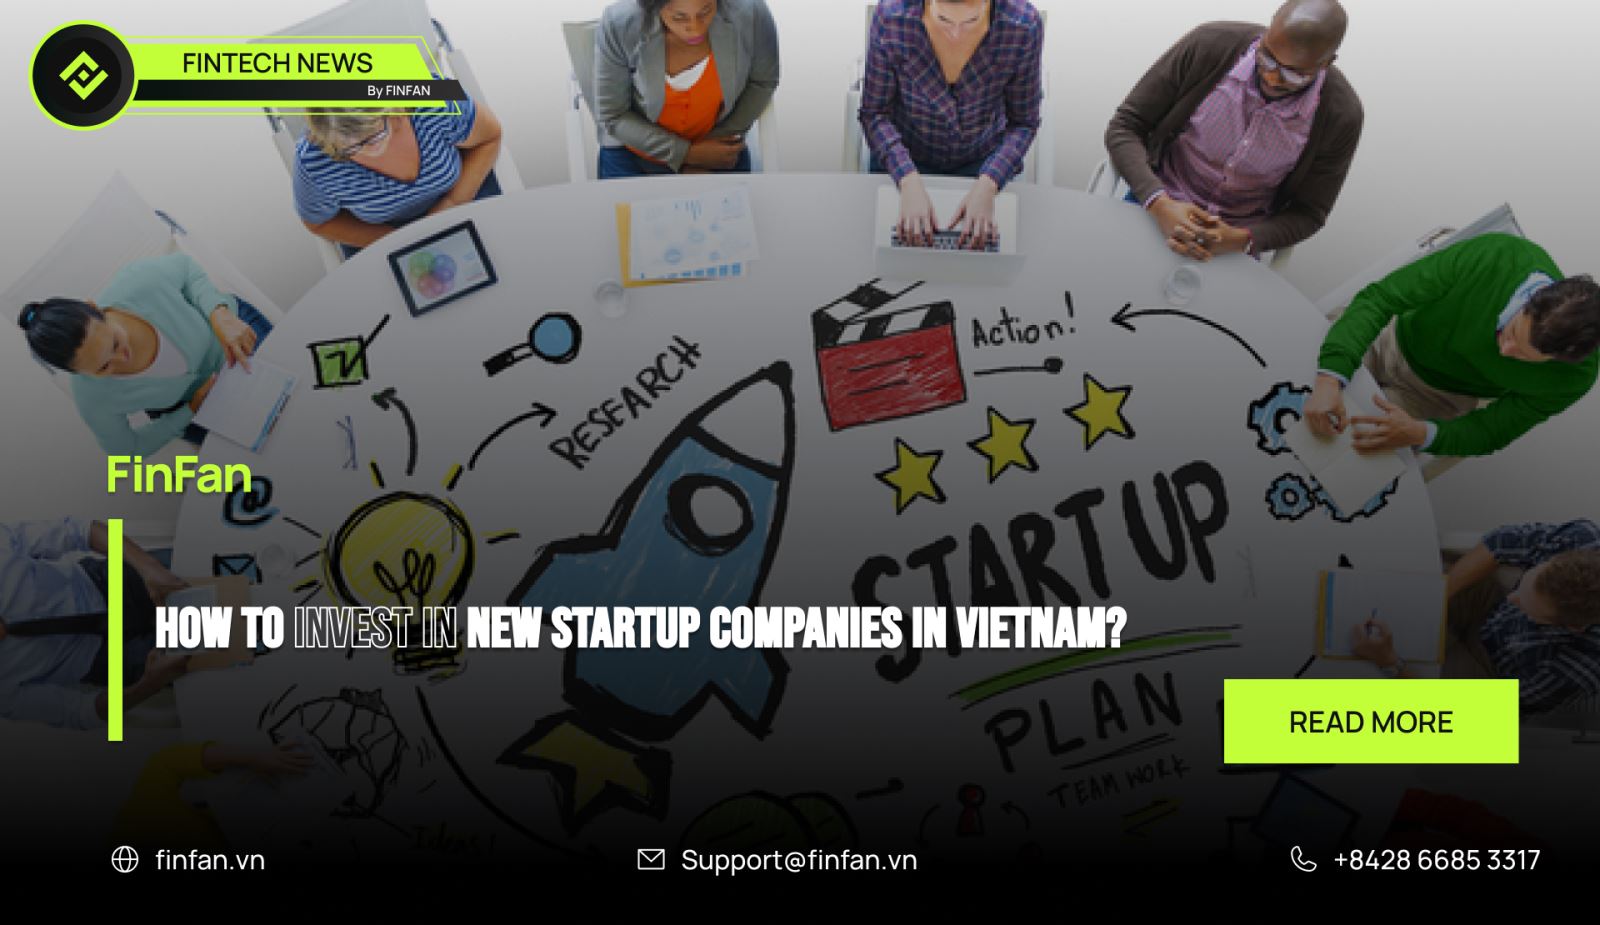 How to find out new startup companies in Vietnam to invest in?